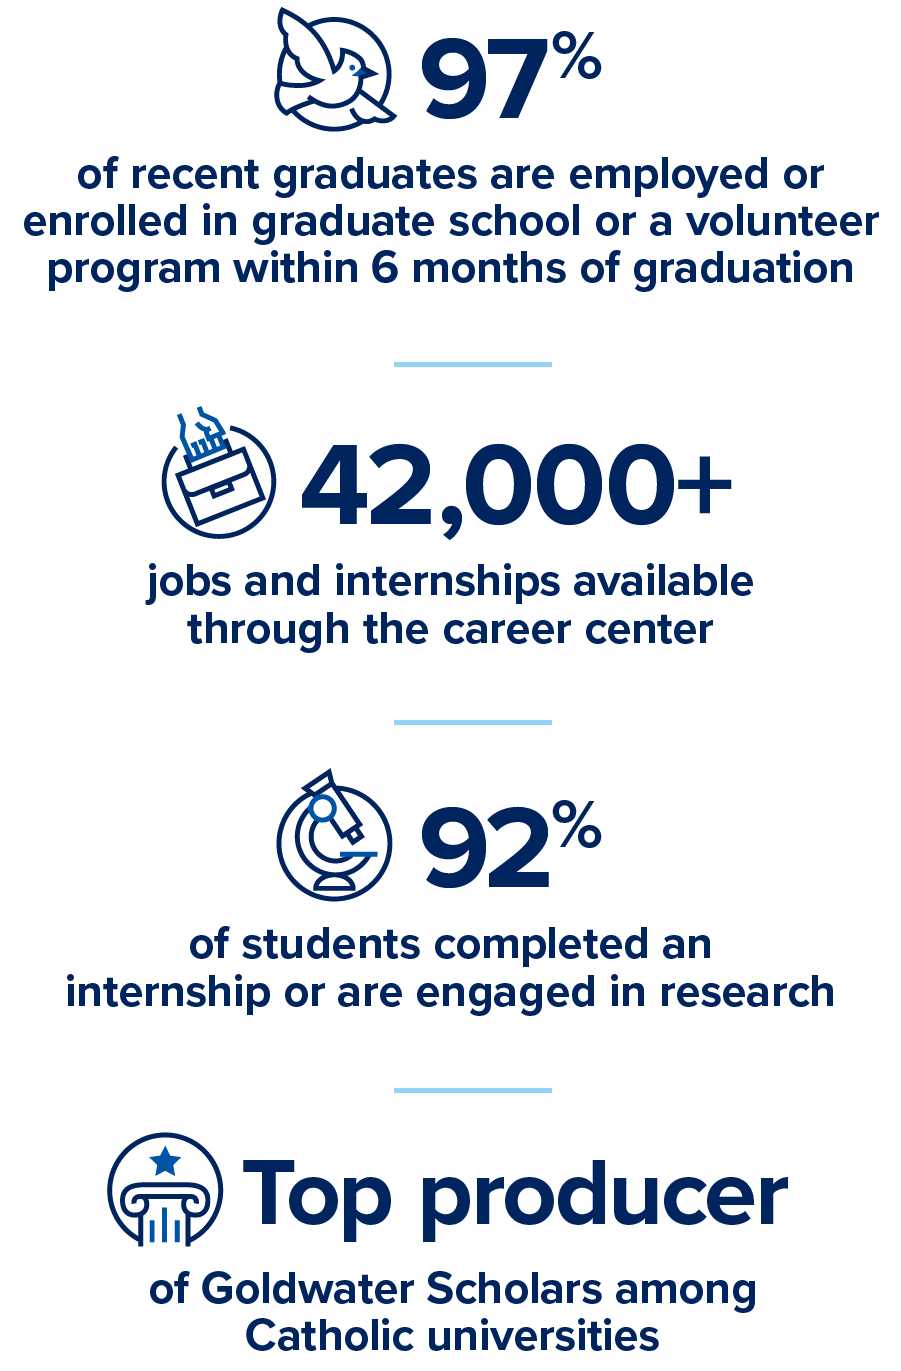 97% of recent graduates are employed or enrolled in graduate school or a volunteer program within 6 months of graduation